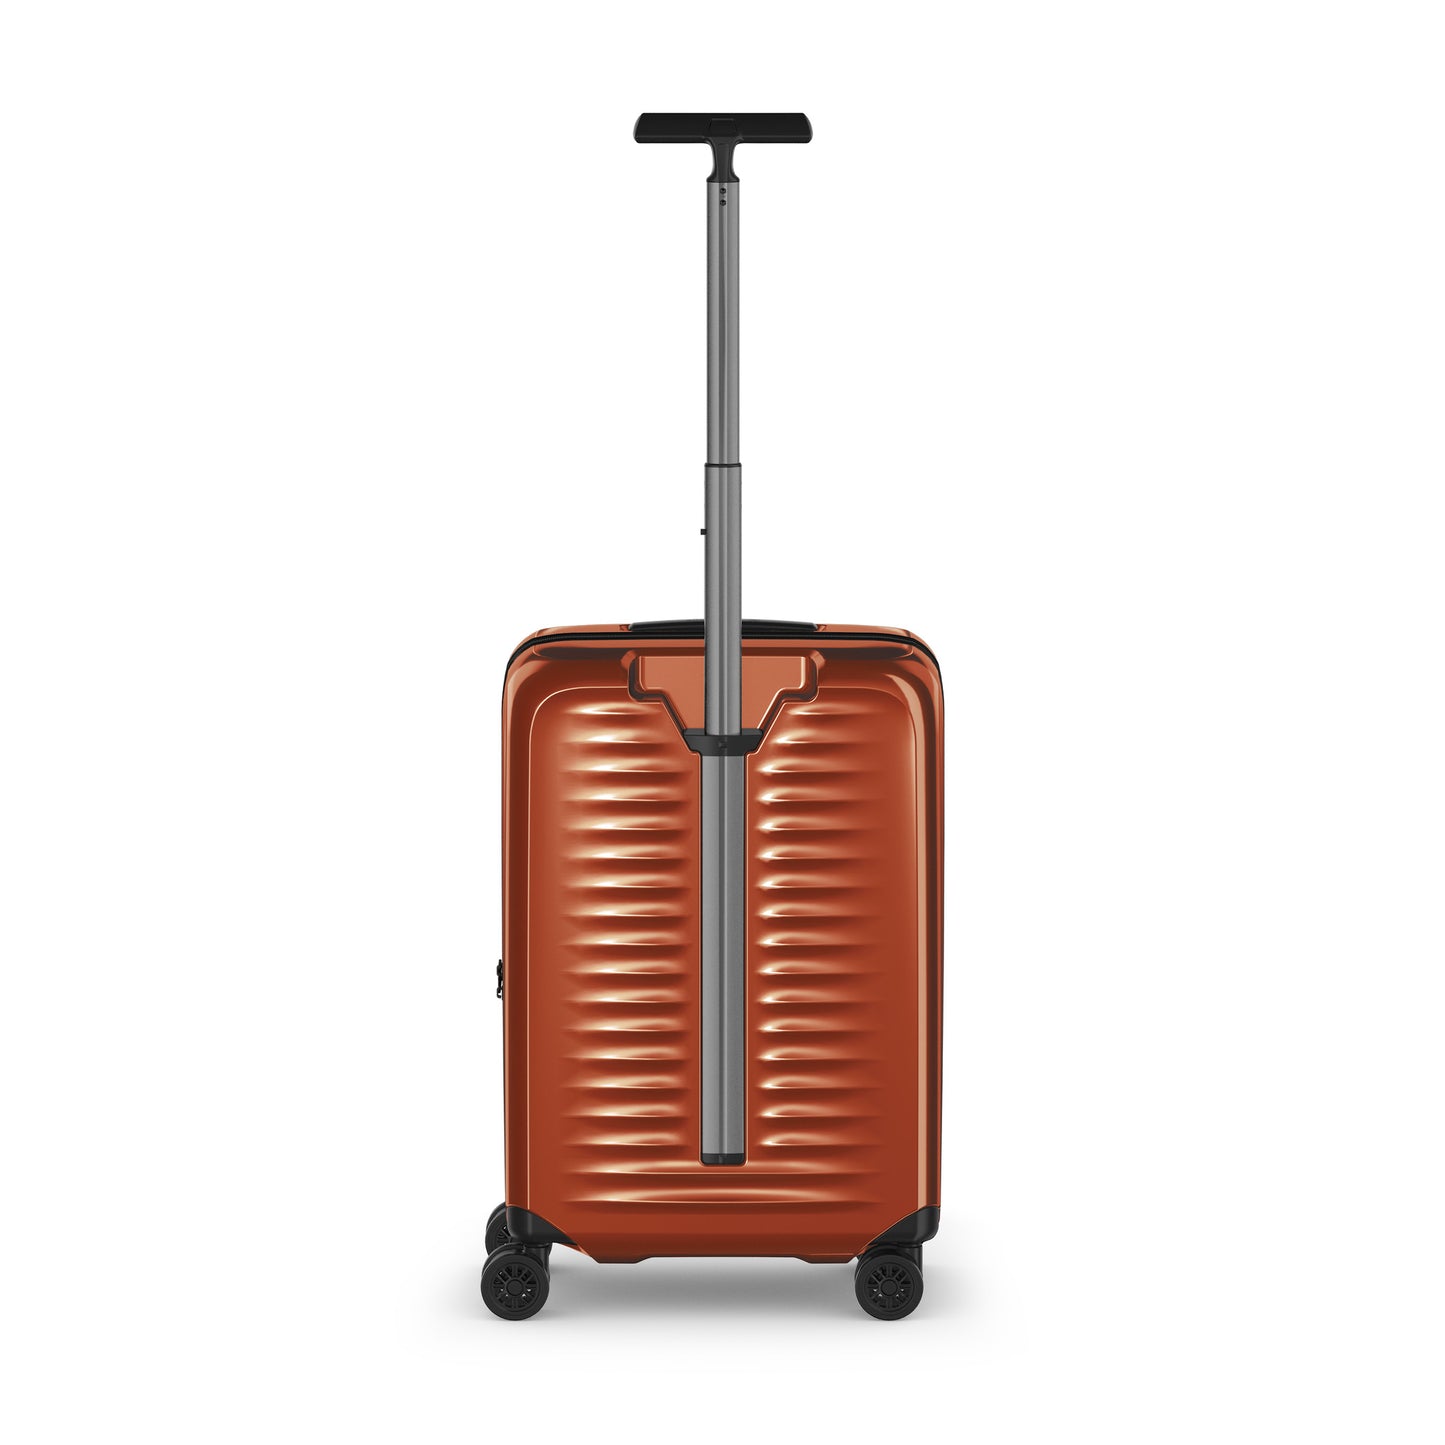 On Sale - Victorinox AIROX Hardside Carry-On+ (PLUS- 22.8 inch) Spinner